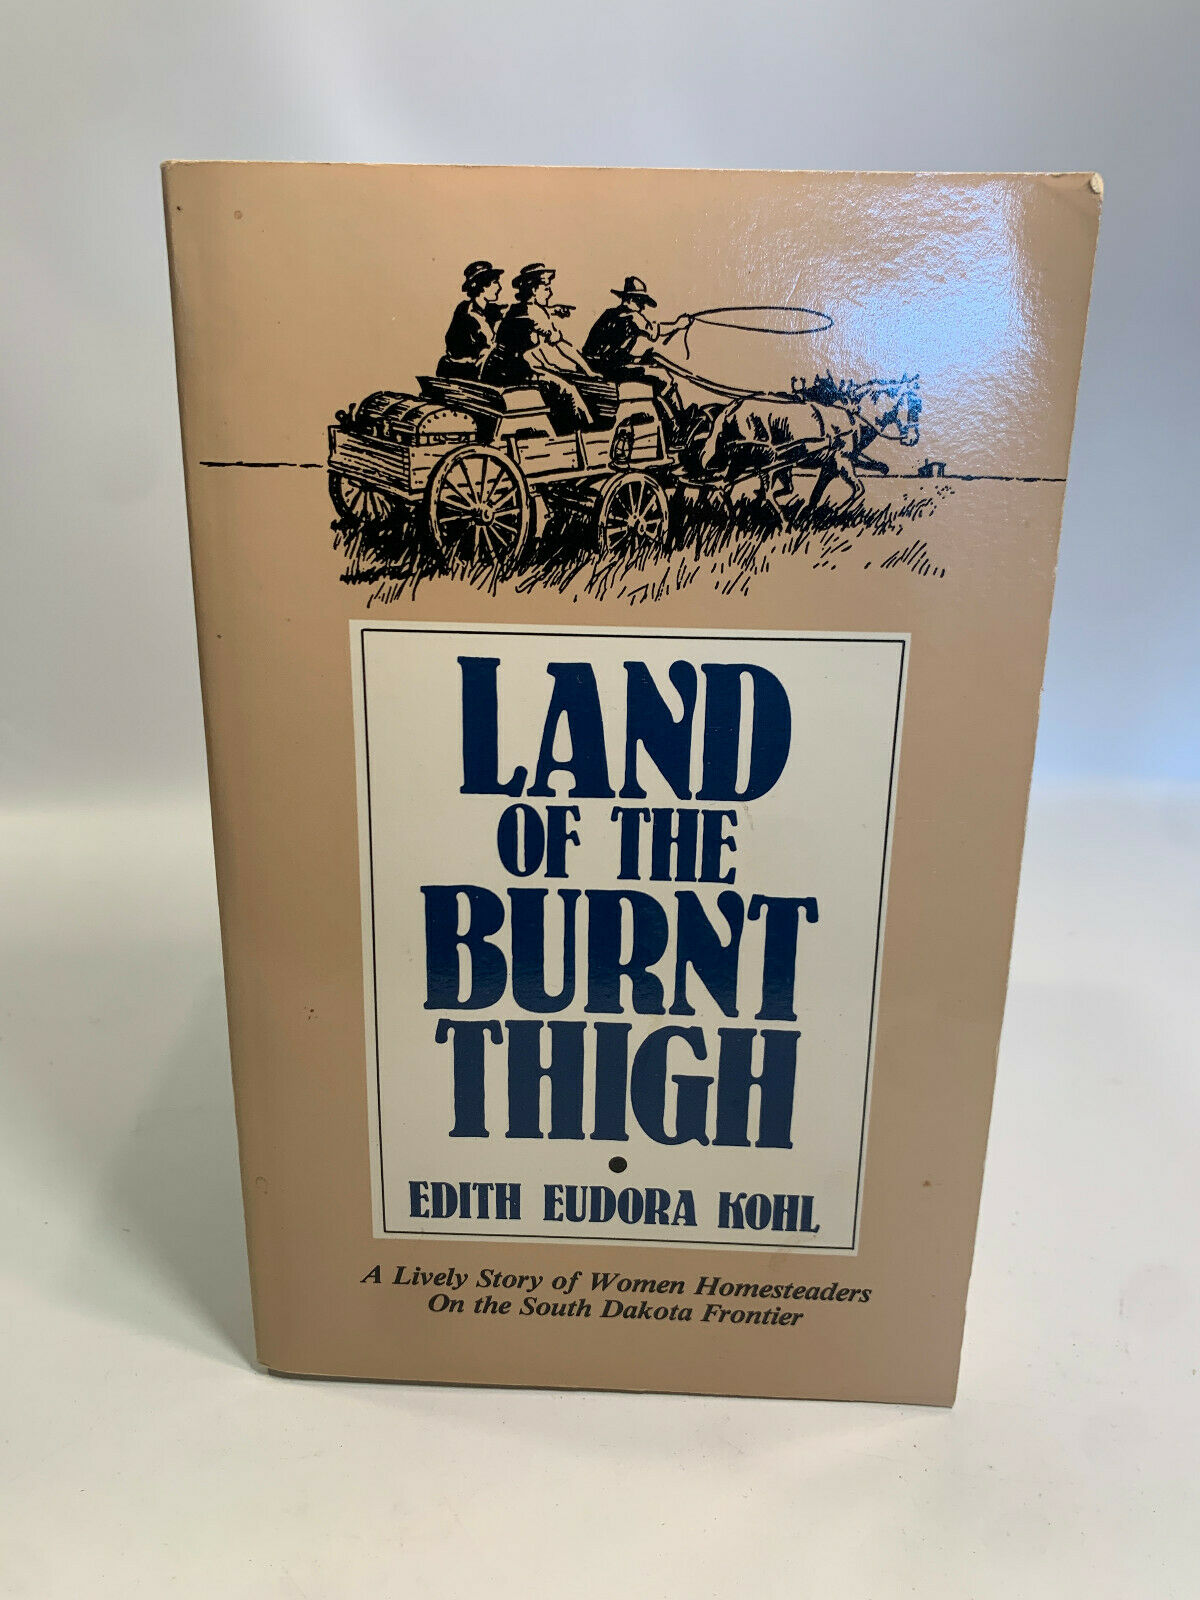 Land of the Burnt Thigh by Edith Eudora Kohl